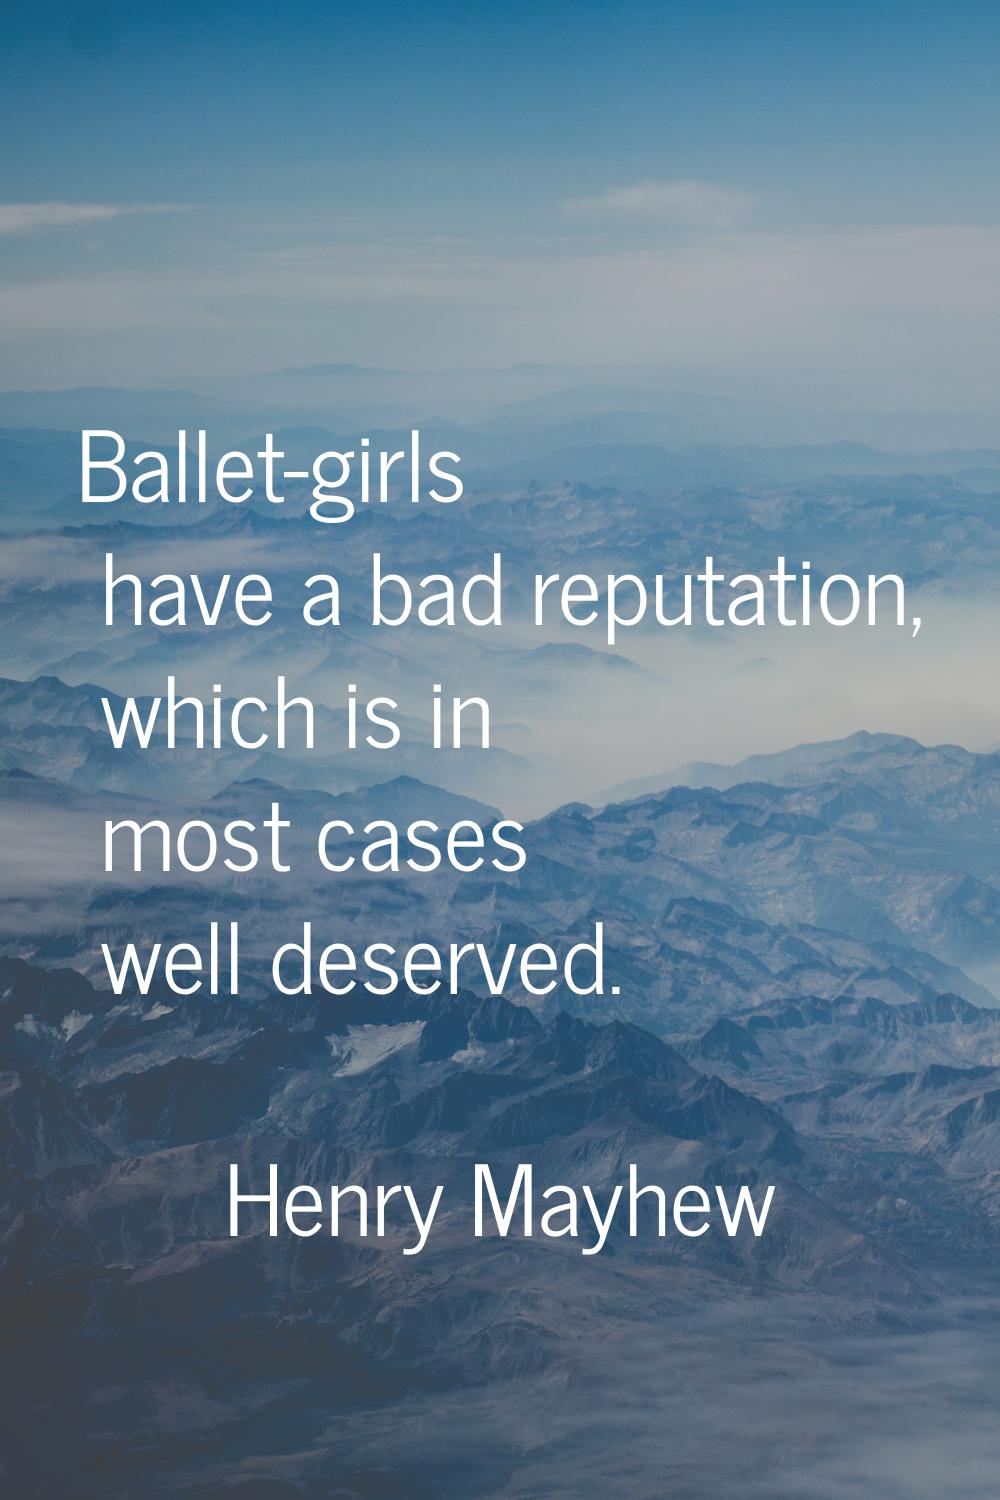 Ballet-girls have a bad reputation, which is in most cases well deserved.